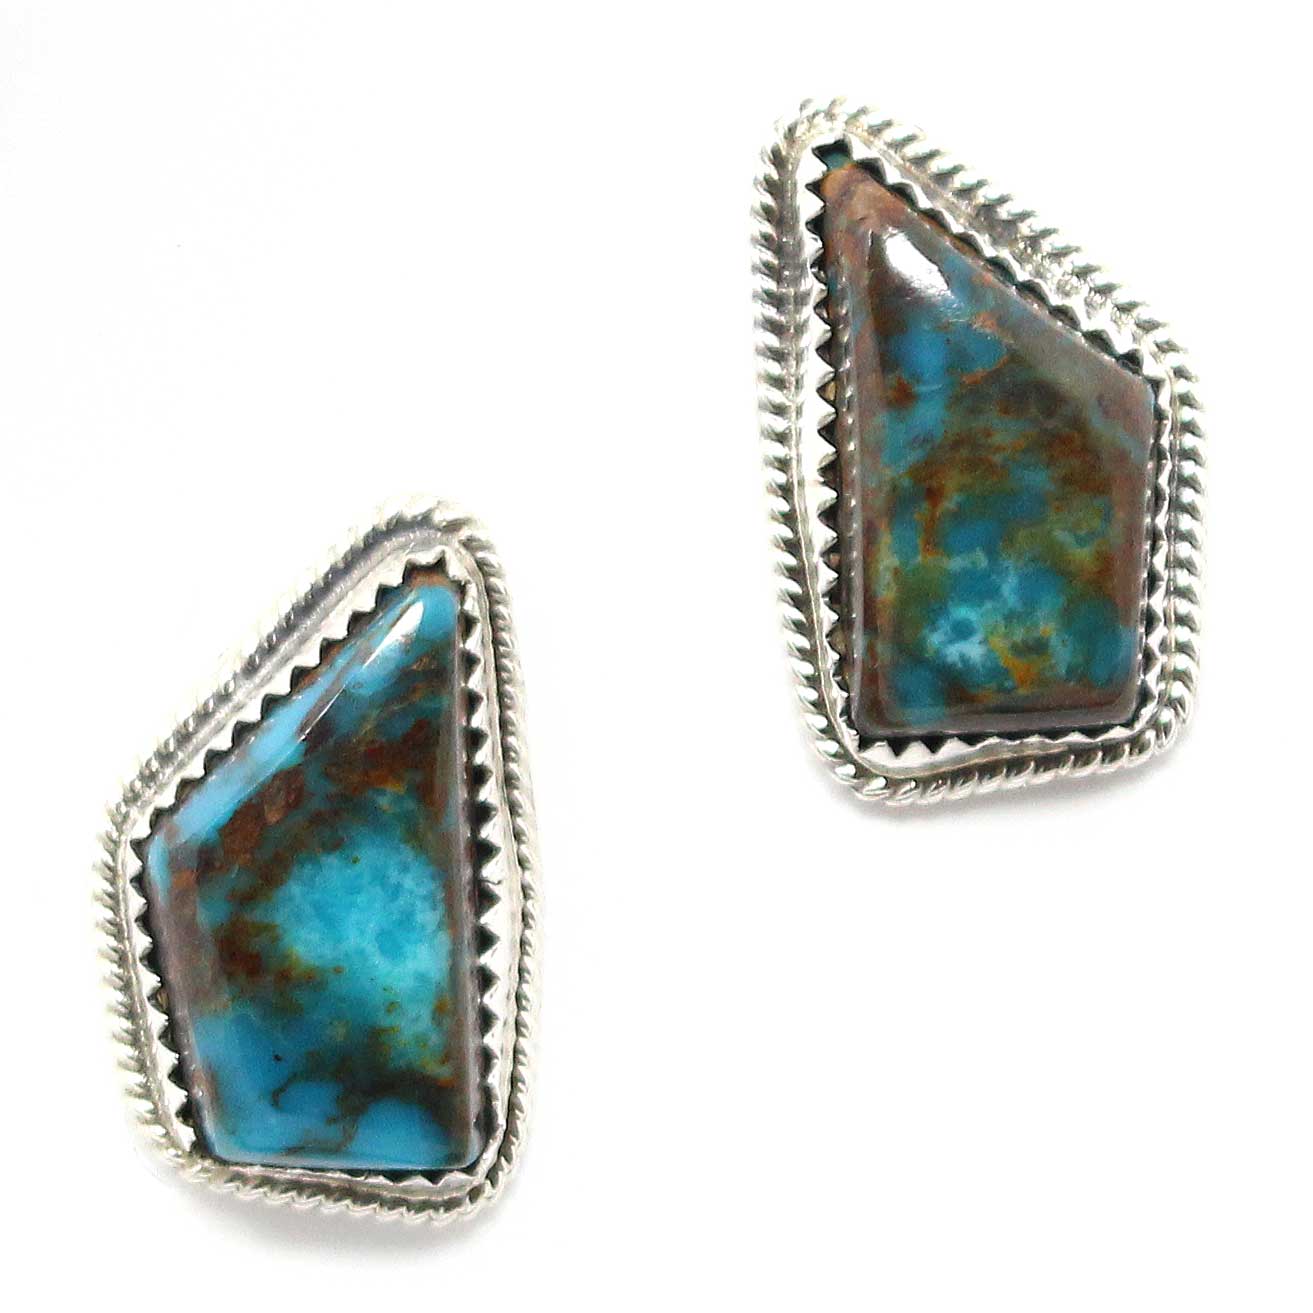 Turquoise Trapezoid Shaped Earrings by Largo